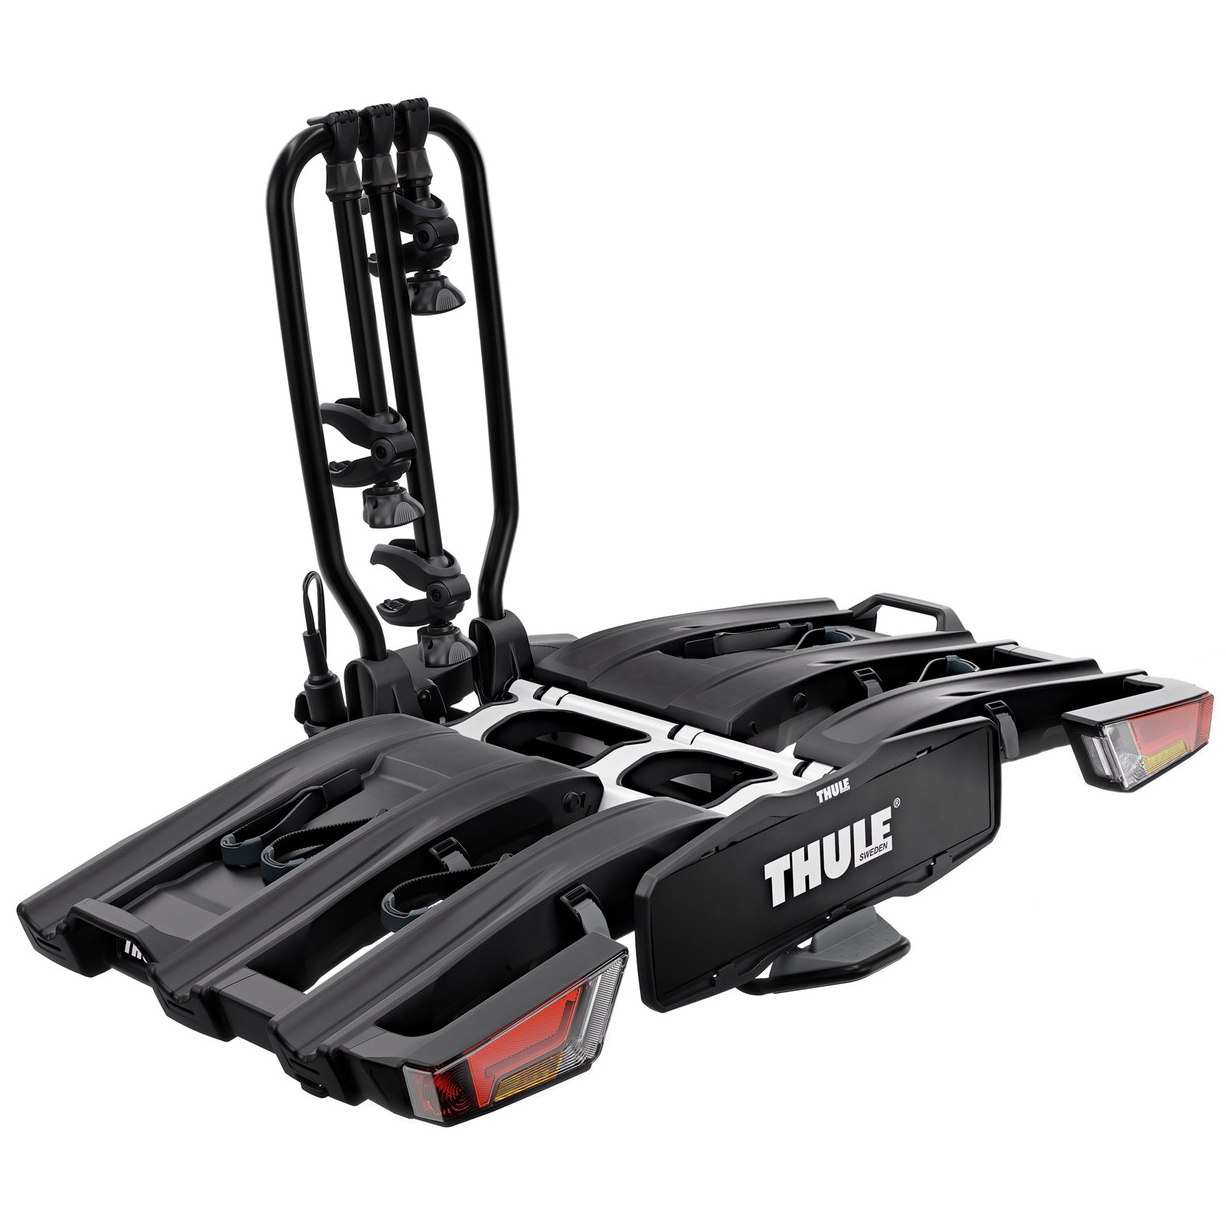 Picture of Thule EasyFold XT 3 Bike Rack for three Bikes without Bag and Rim Protector - black